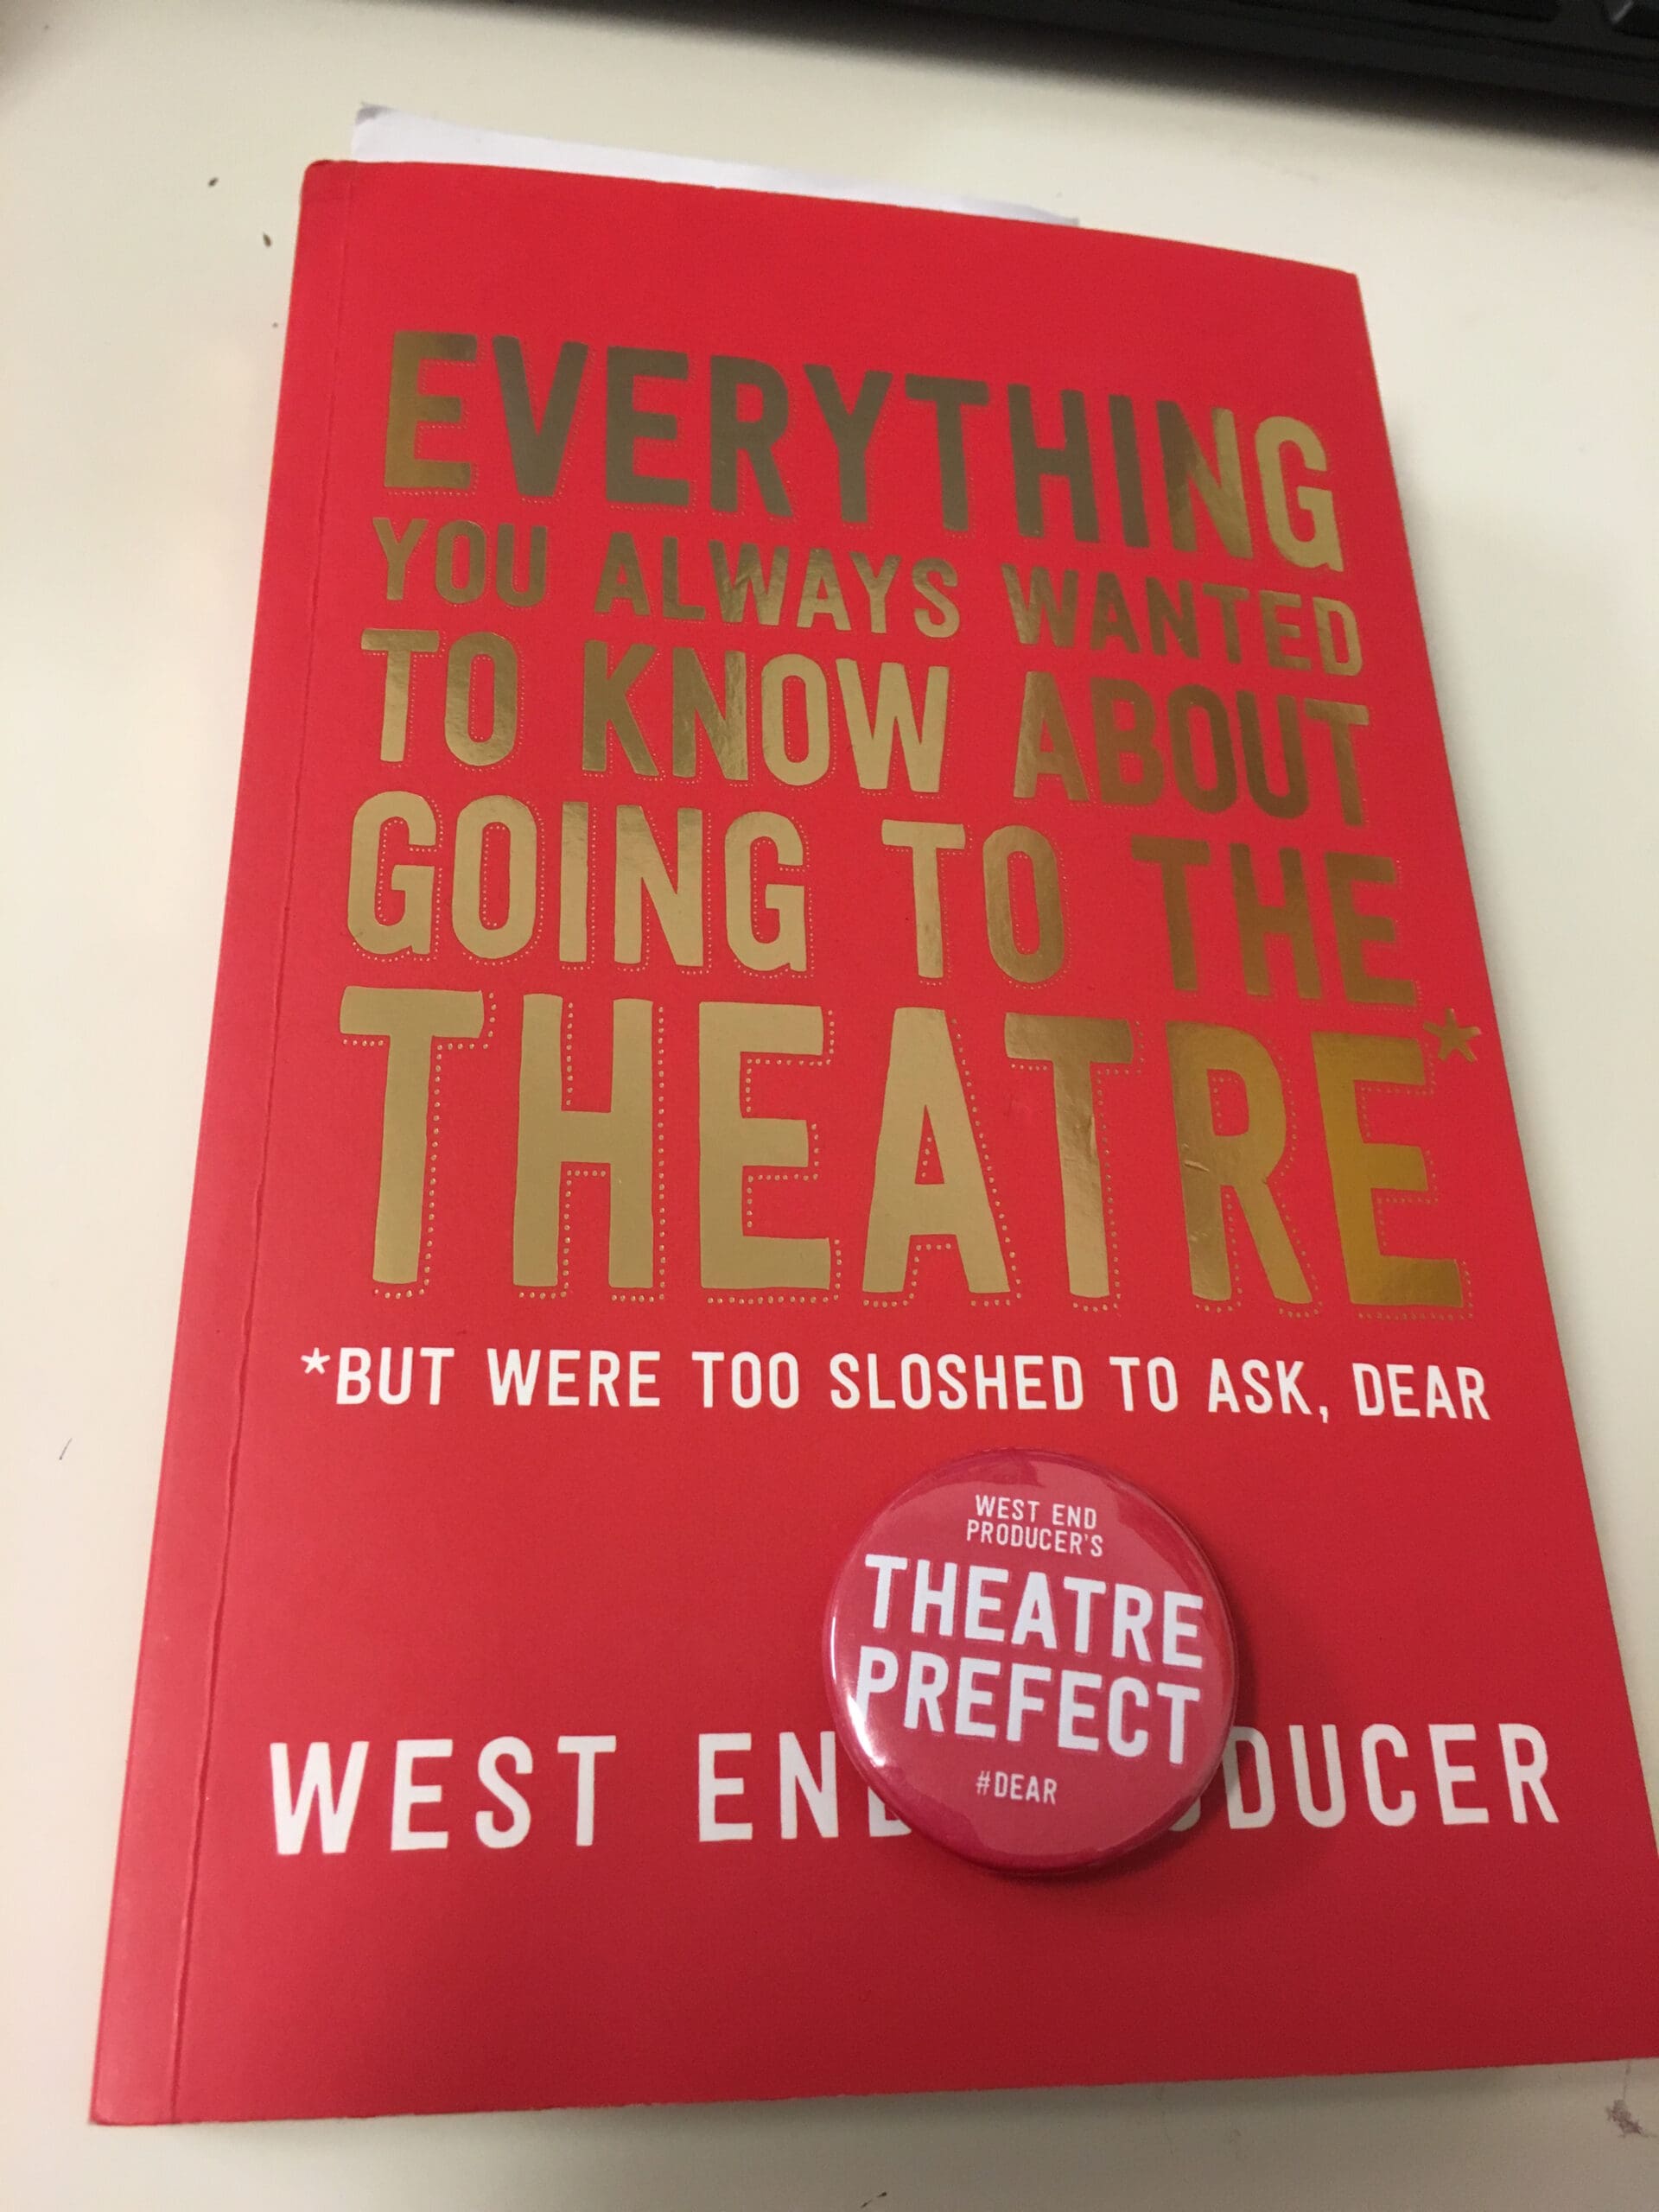 Featured image for “Enter our competition for a chance to win a signed copy of West End Producer’s New Book”